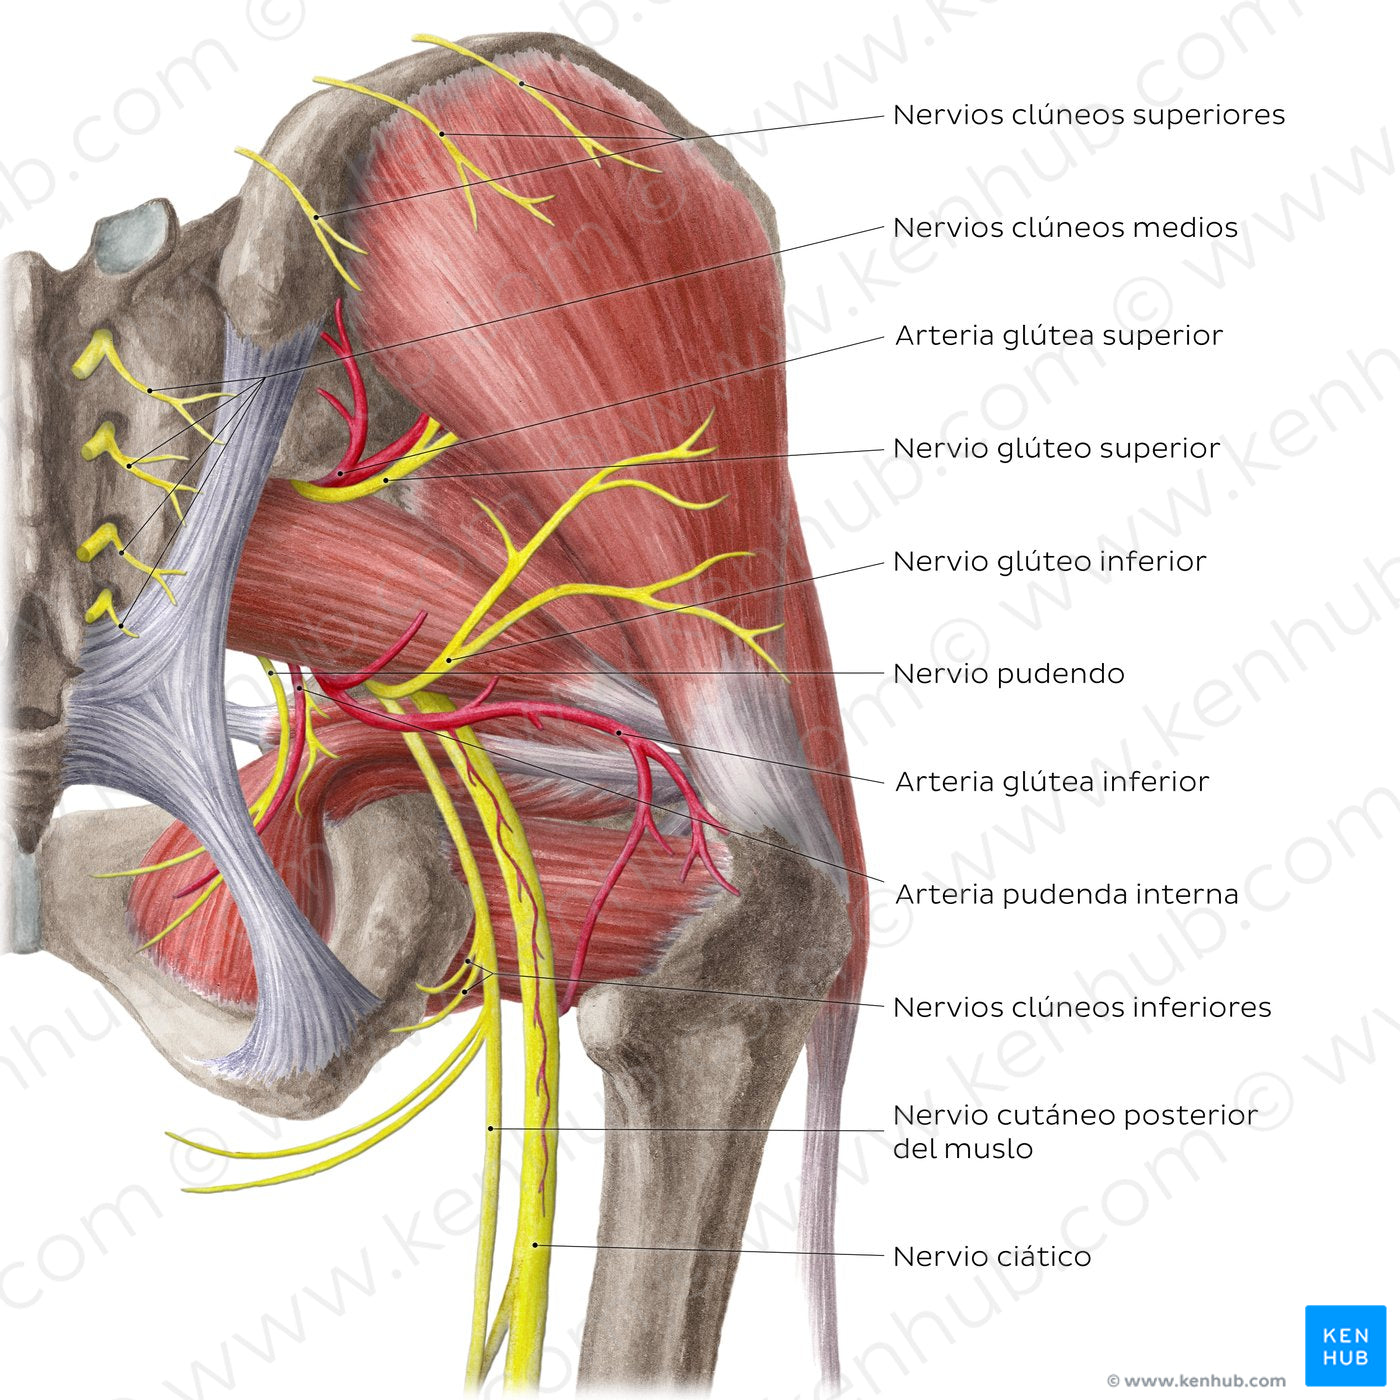 Neurovasculature of the hip and thigh (posterior view) (Spanish)